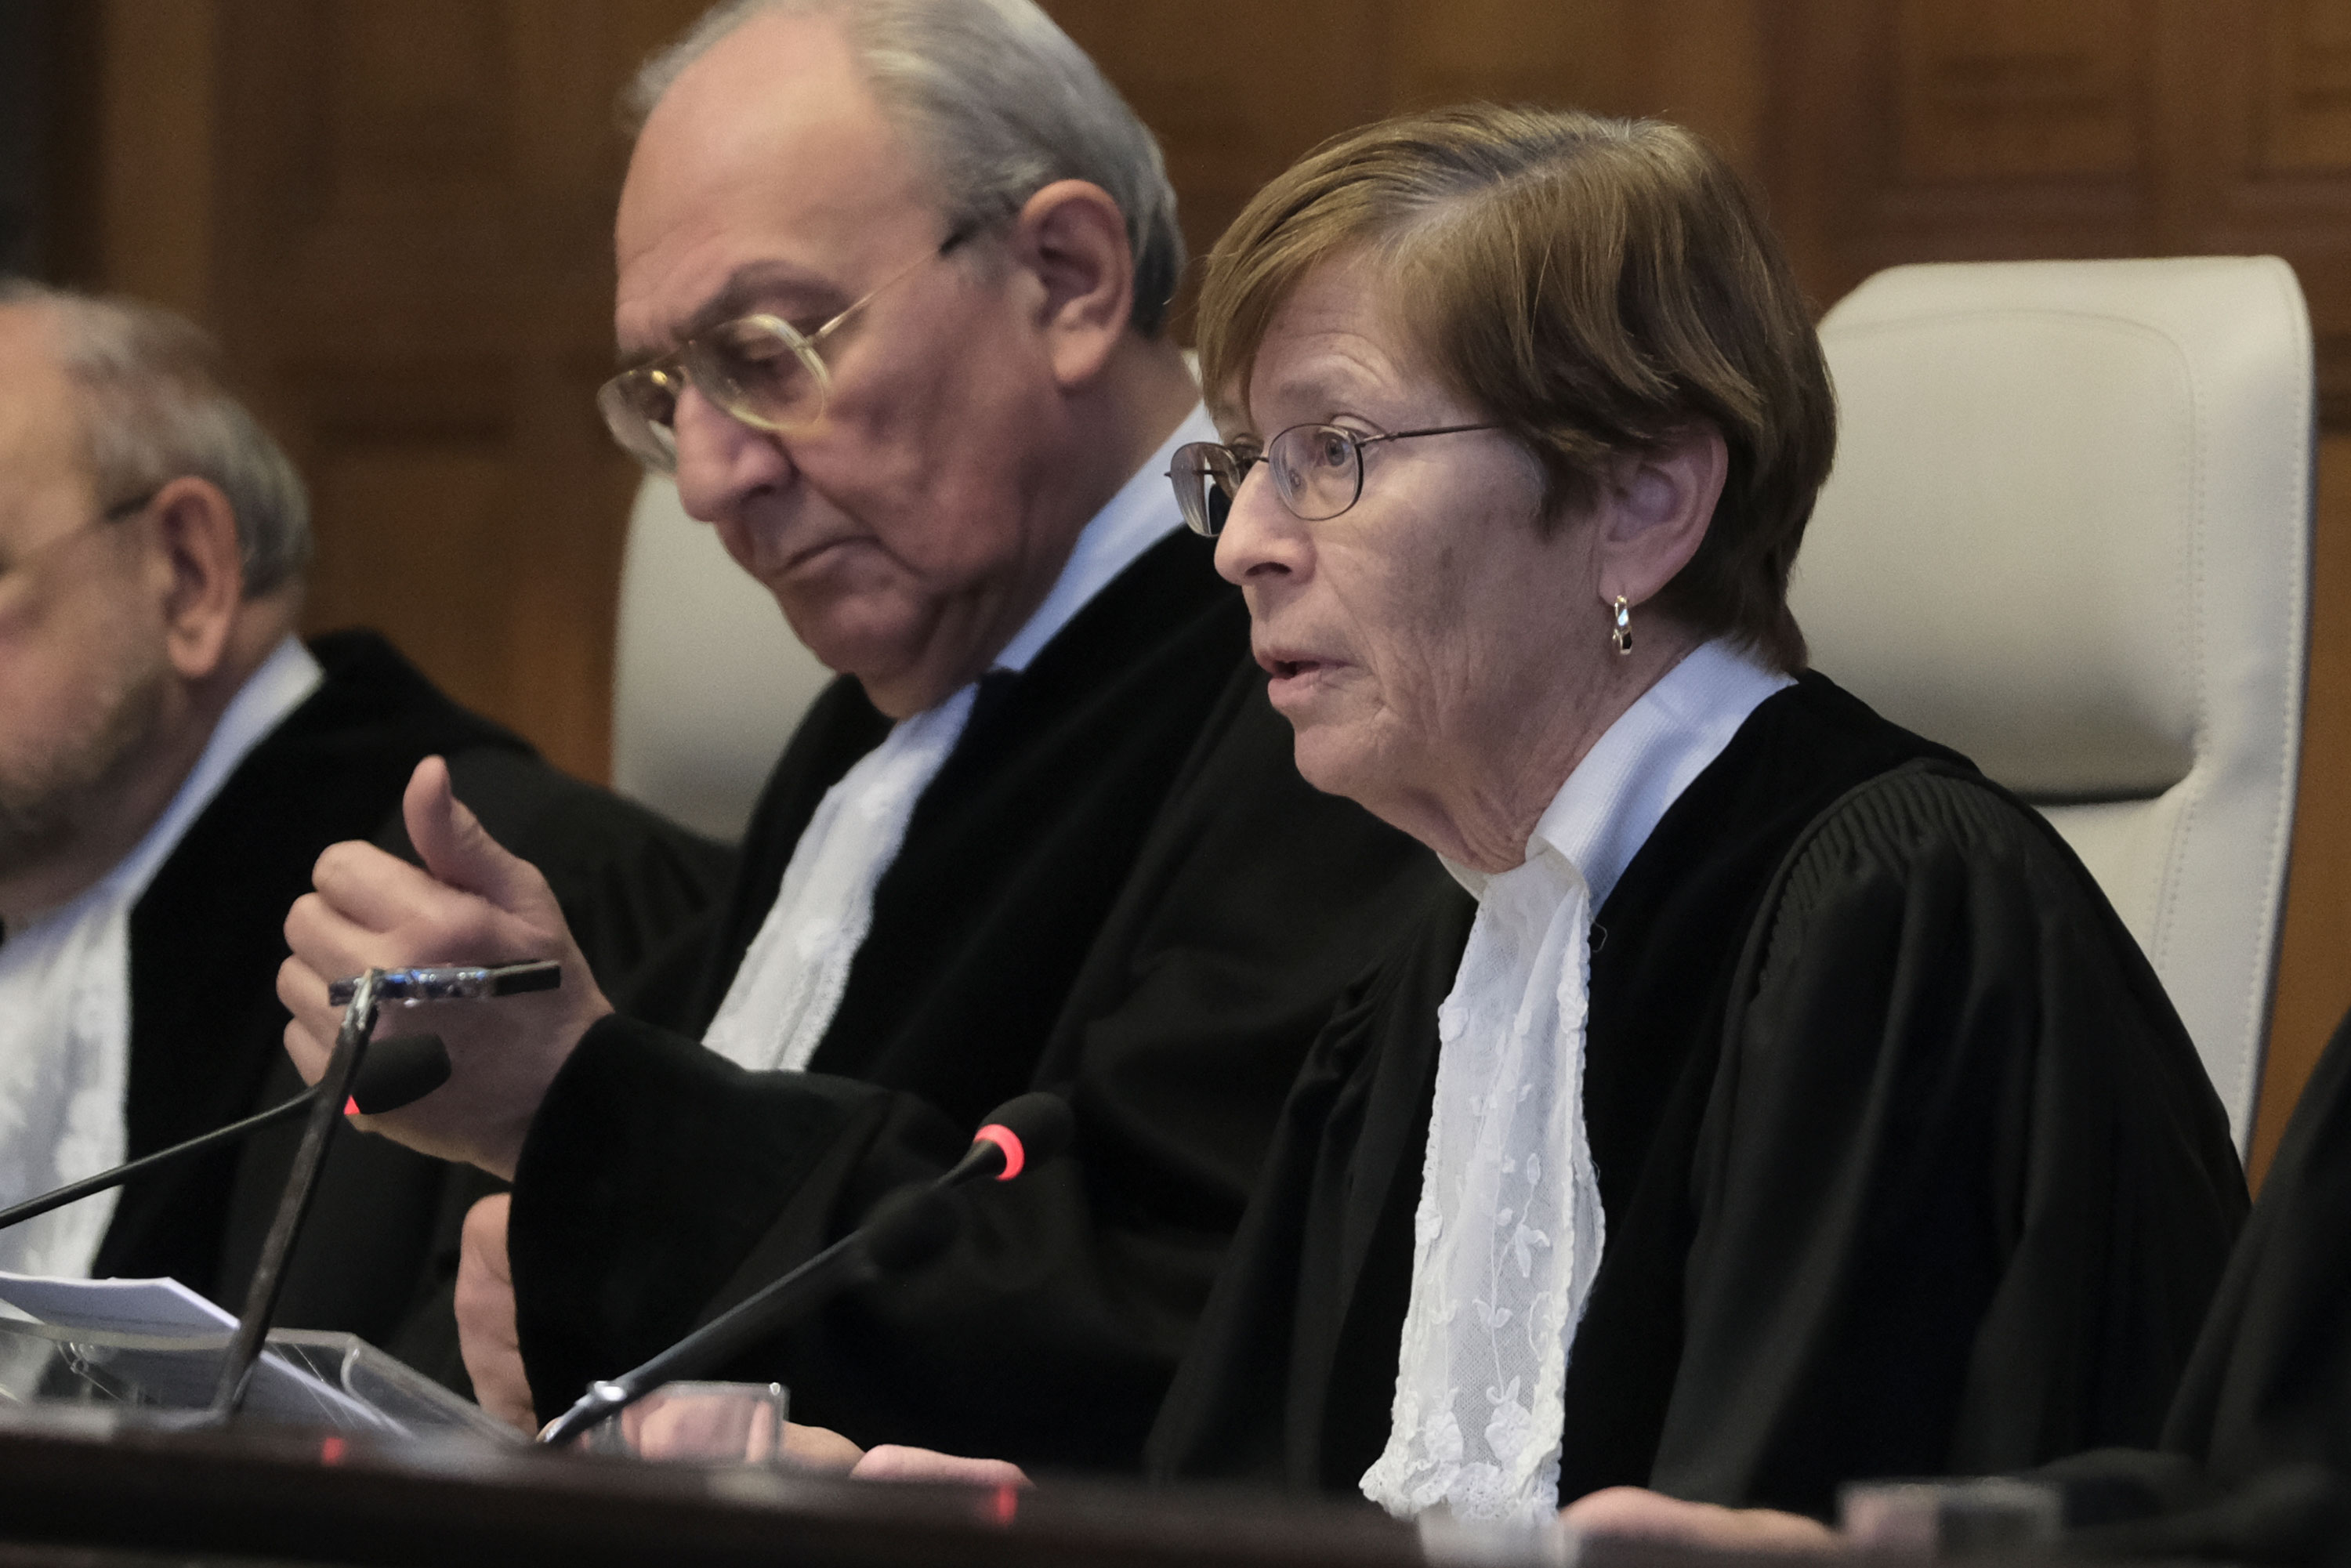 Judge Joan Donoghue opens the session at the International Court of Justice in The Hague, Netherlands, on Friday.